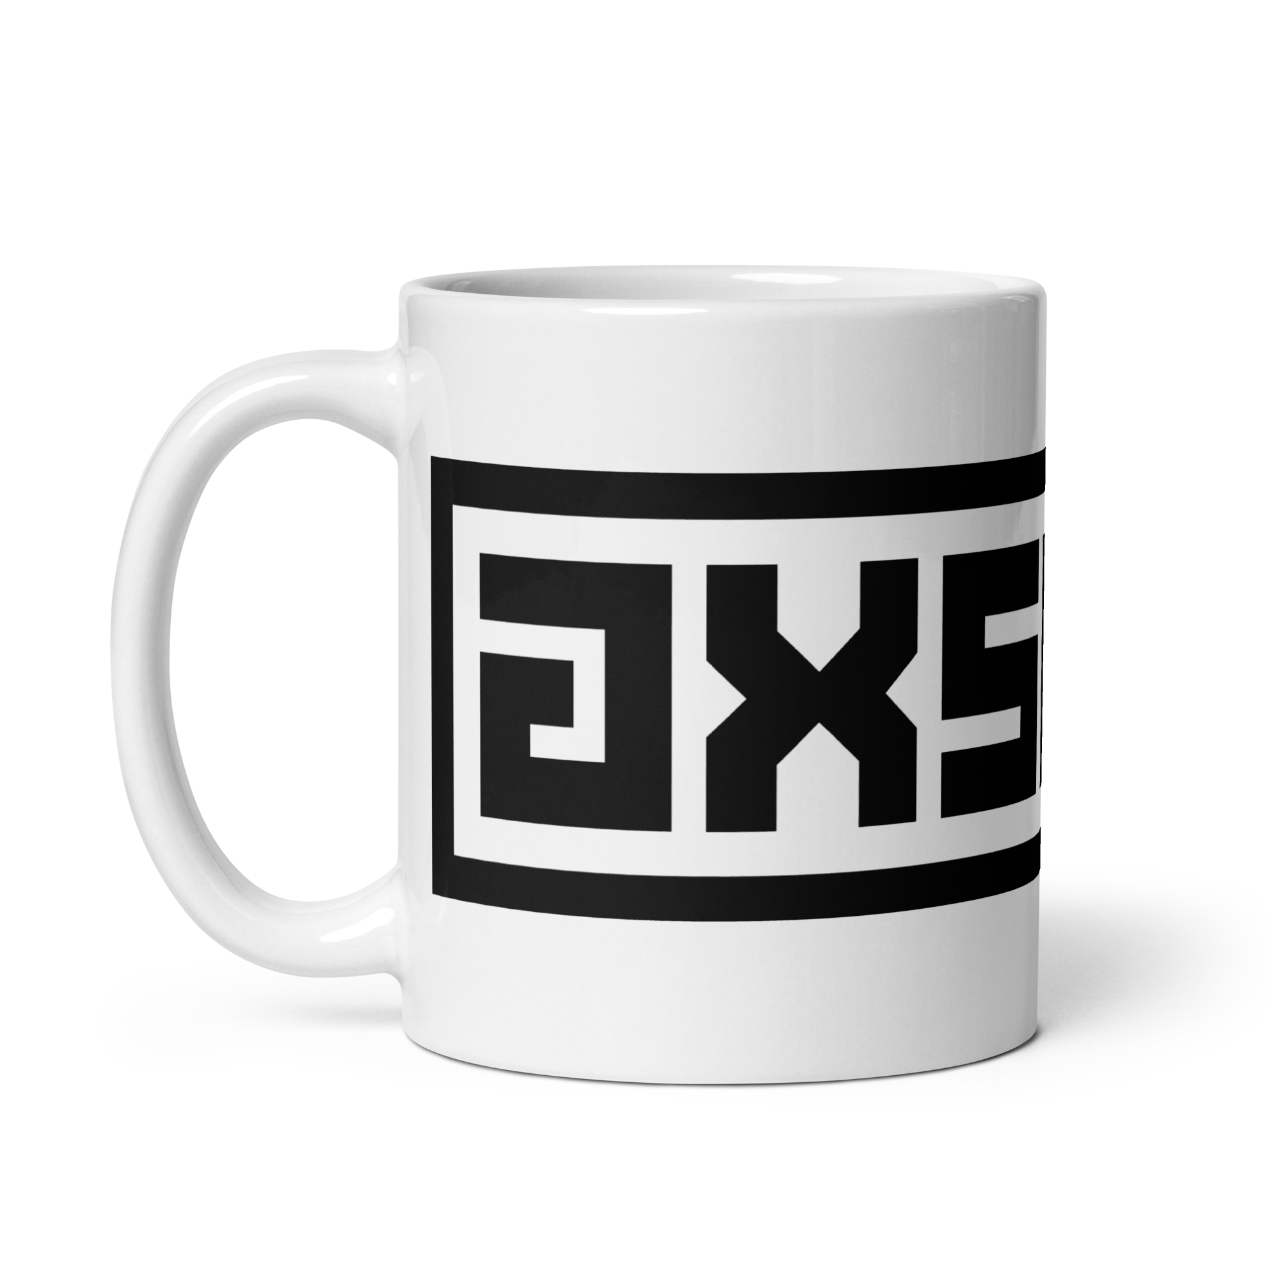 axsgtr axess electronics guitar music industry branded merchandise swag white ceramic coffee mug 11oz